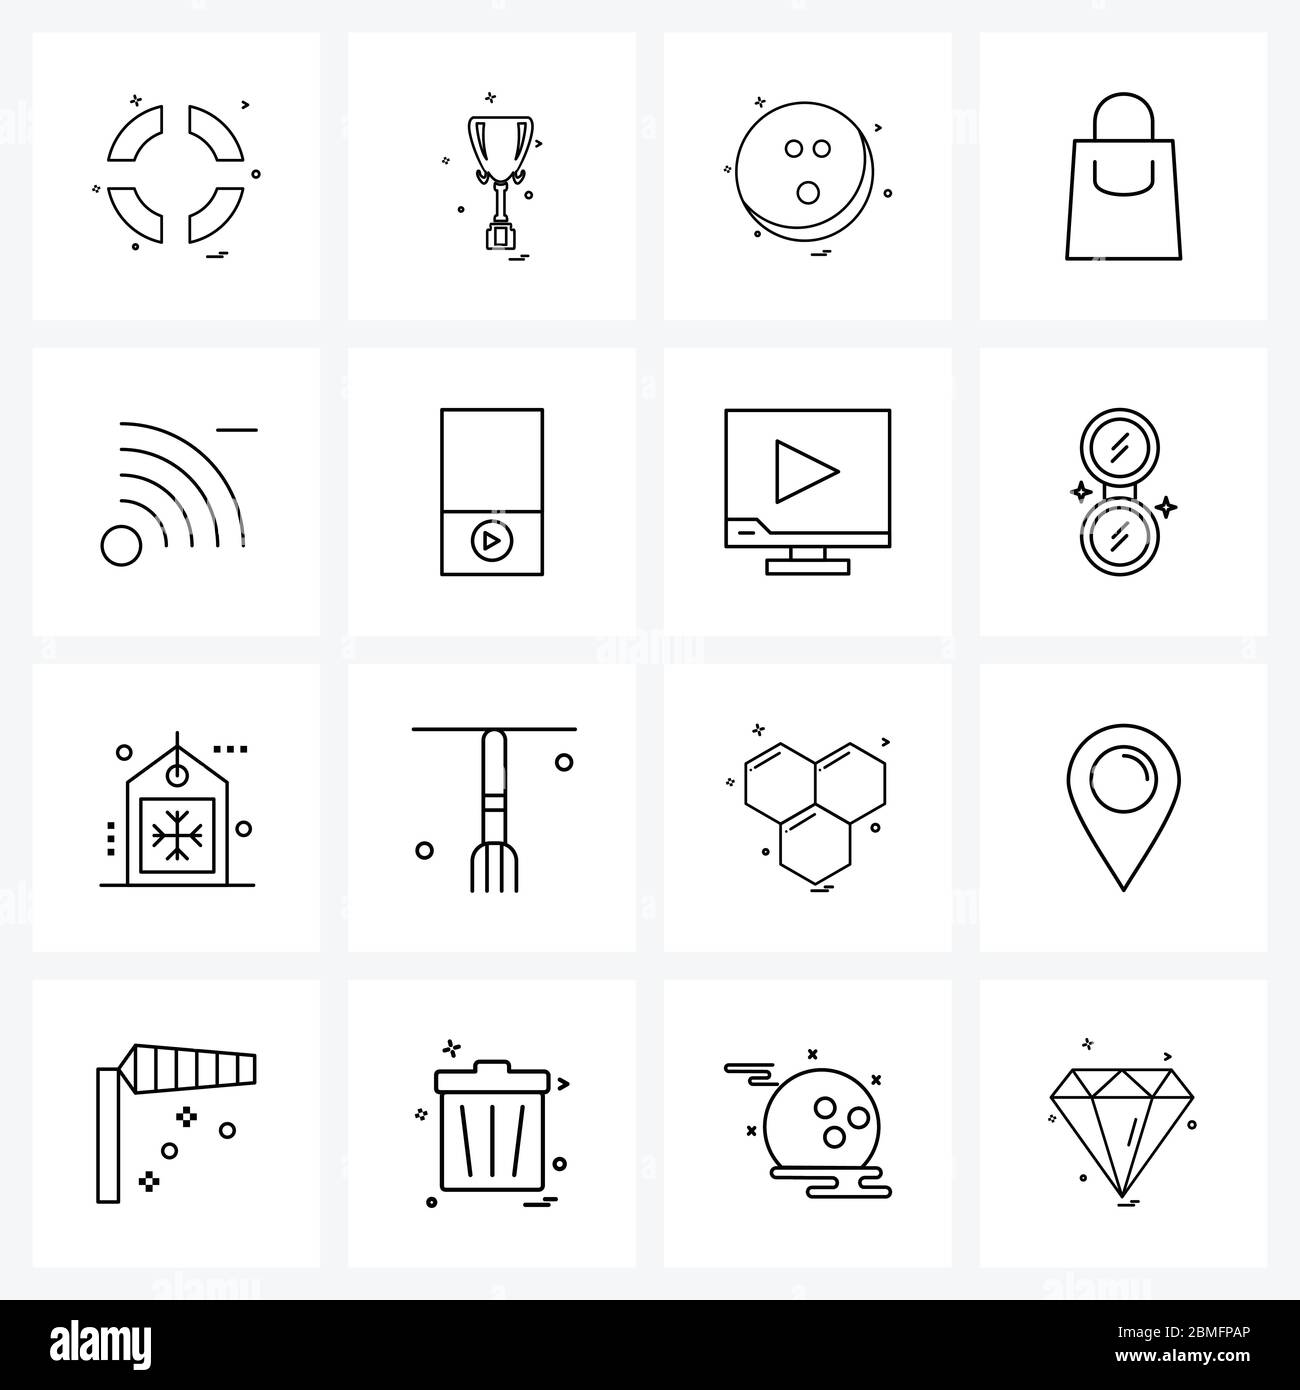 Isolated Symbols Set of 16 Simple Line Icons of less, signal, indoor ...